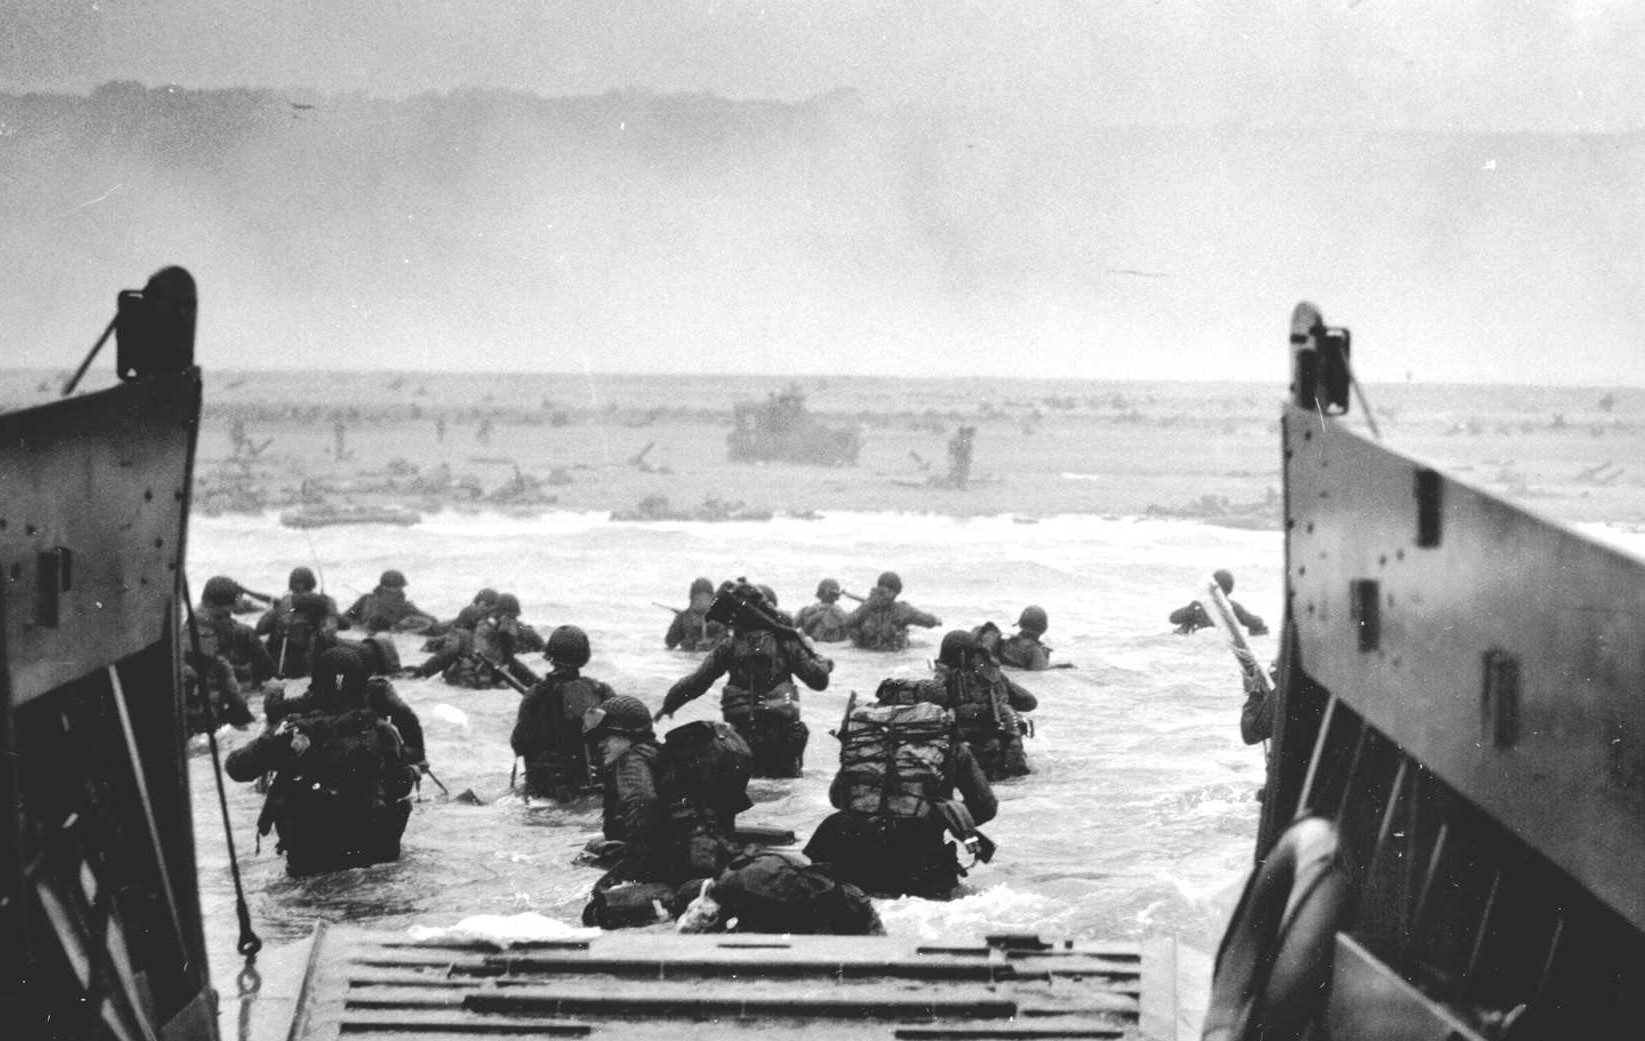 D-Day June 6th, 1944